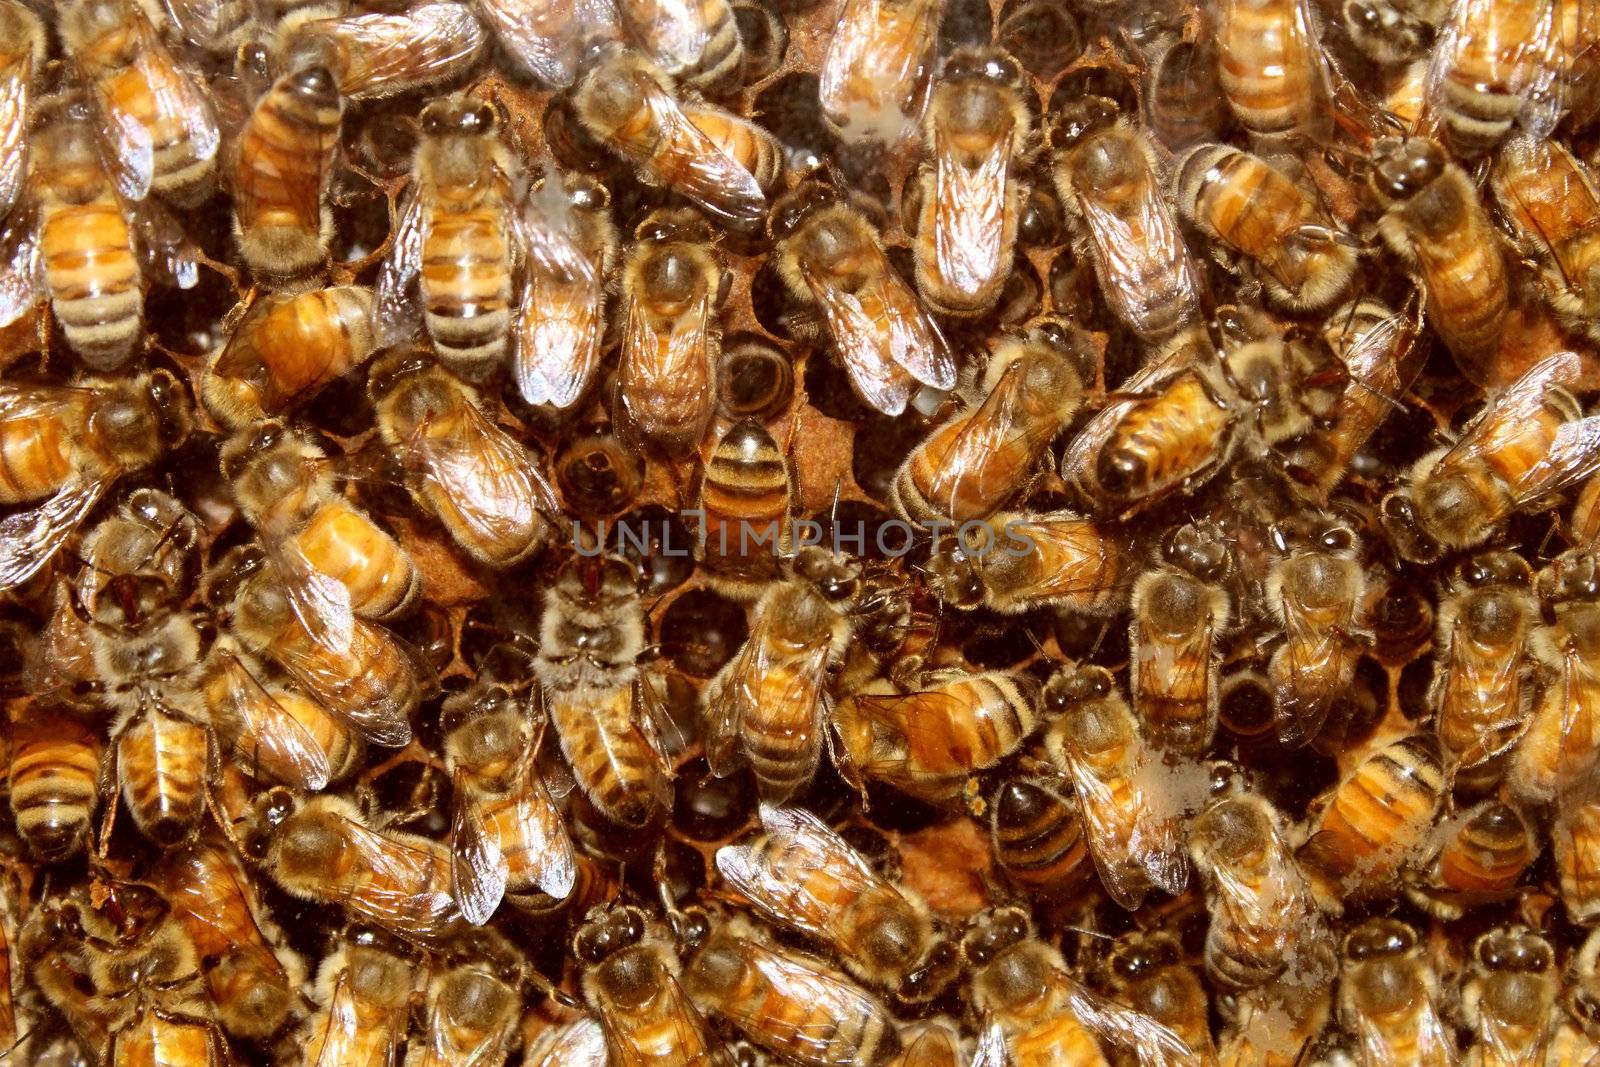 Bees in a beehive making sweet honey in the the honeycomb cell structures working together as a team of flying insects franticaly feeding the larvea as a golden yellow nature background.